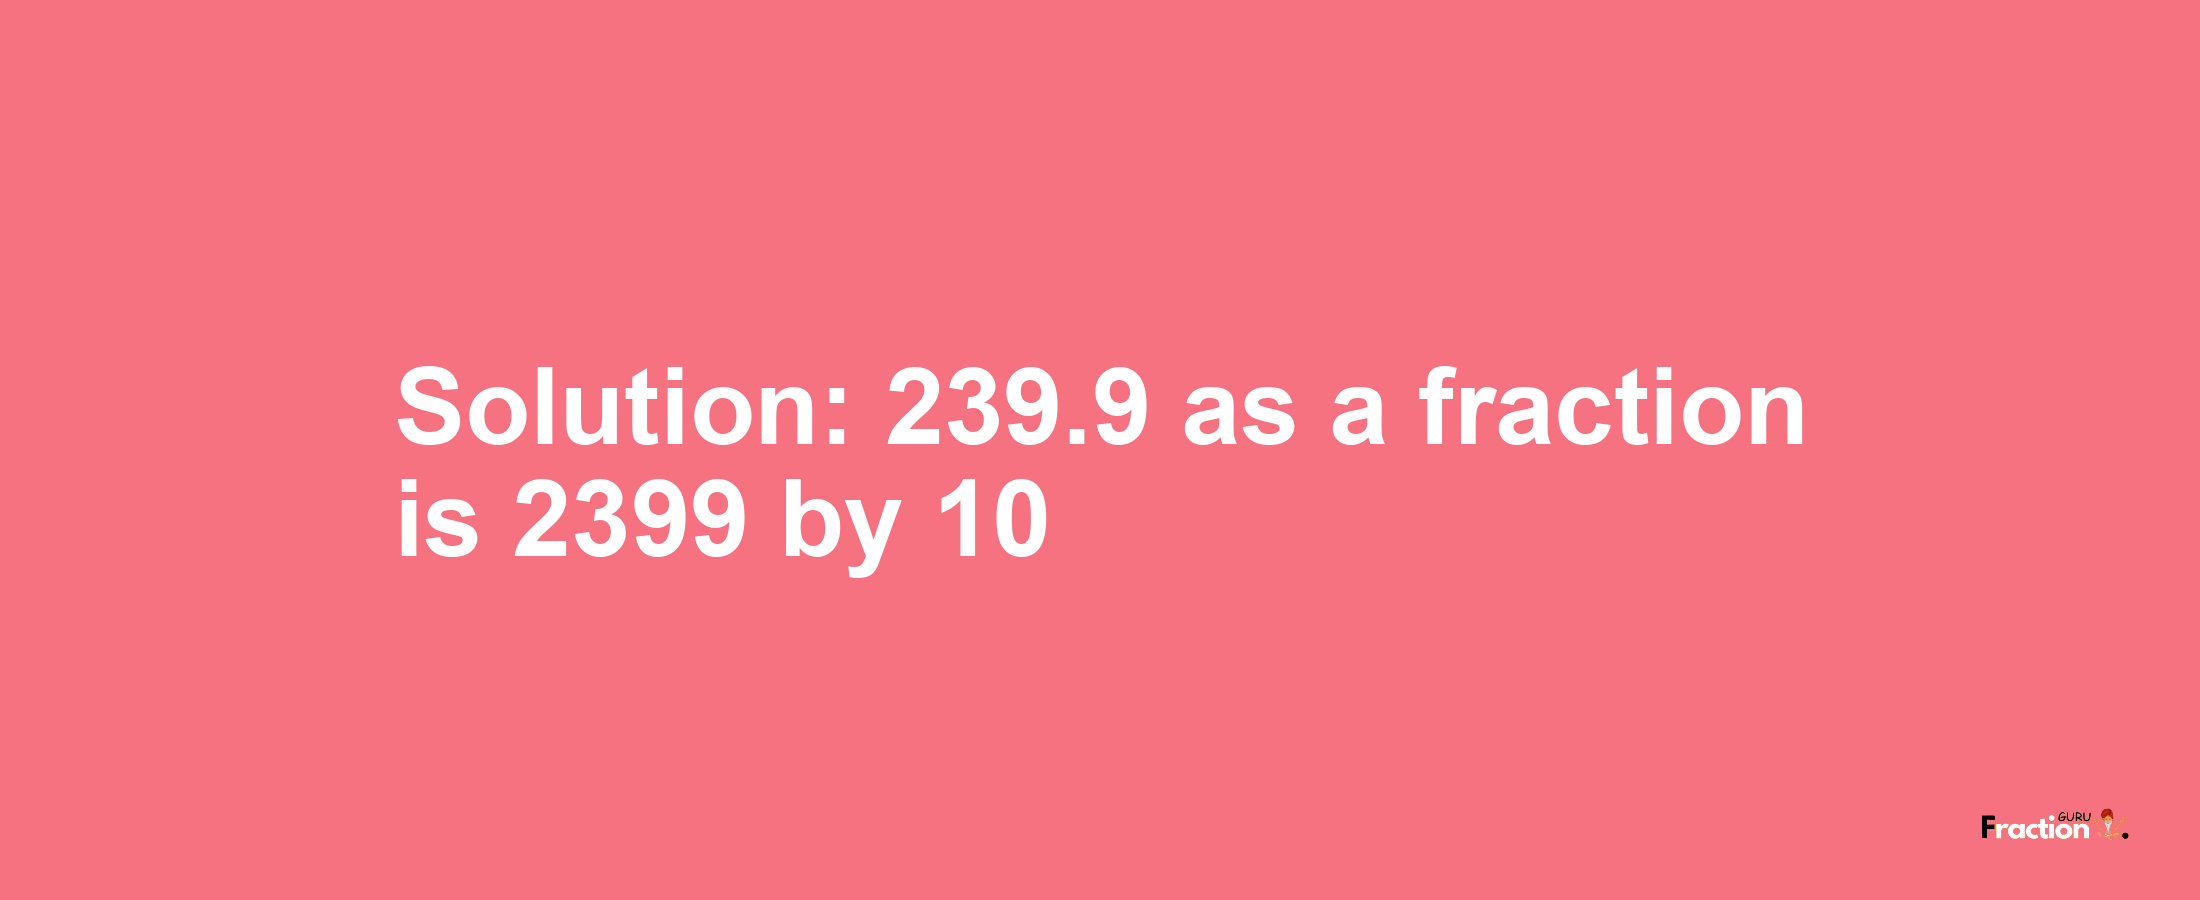 Solution:239.9 as a fraction is 2399/10